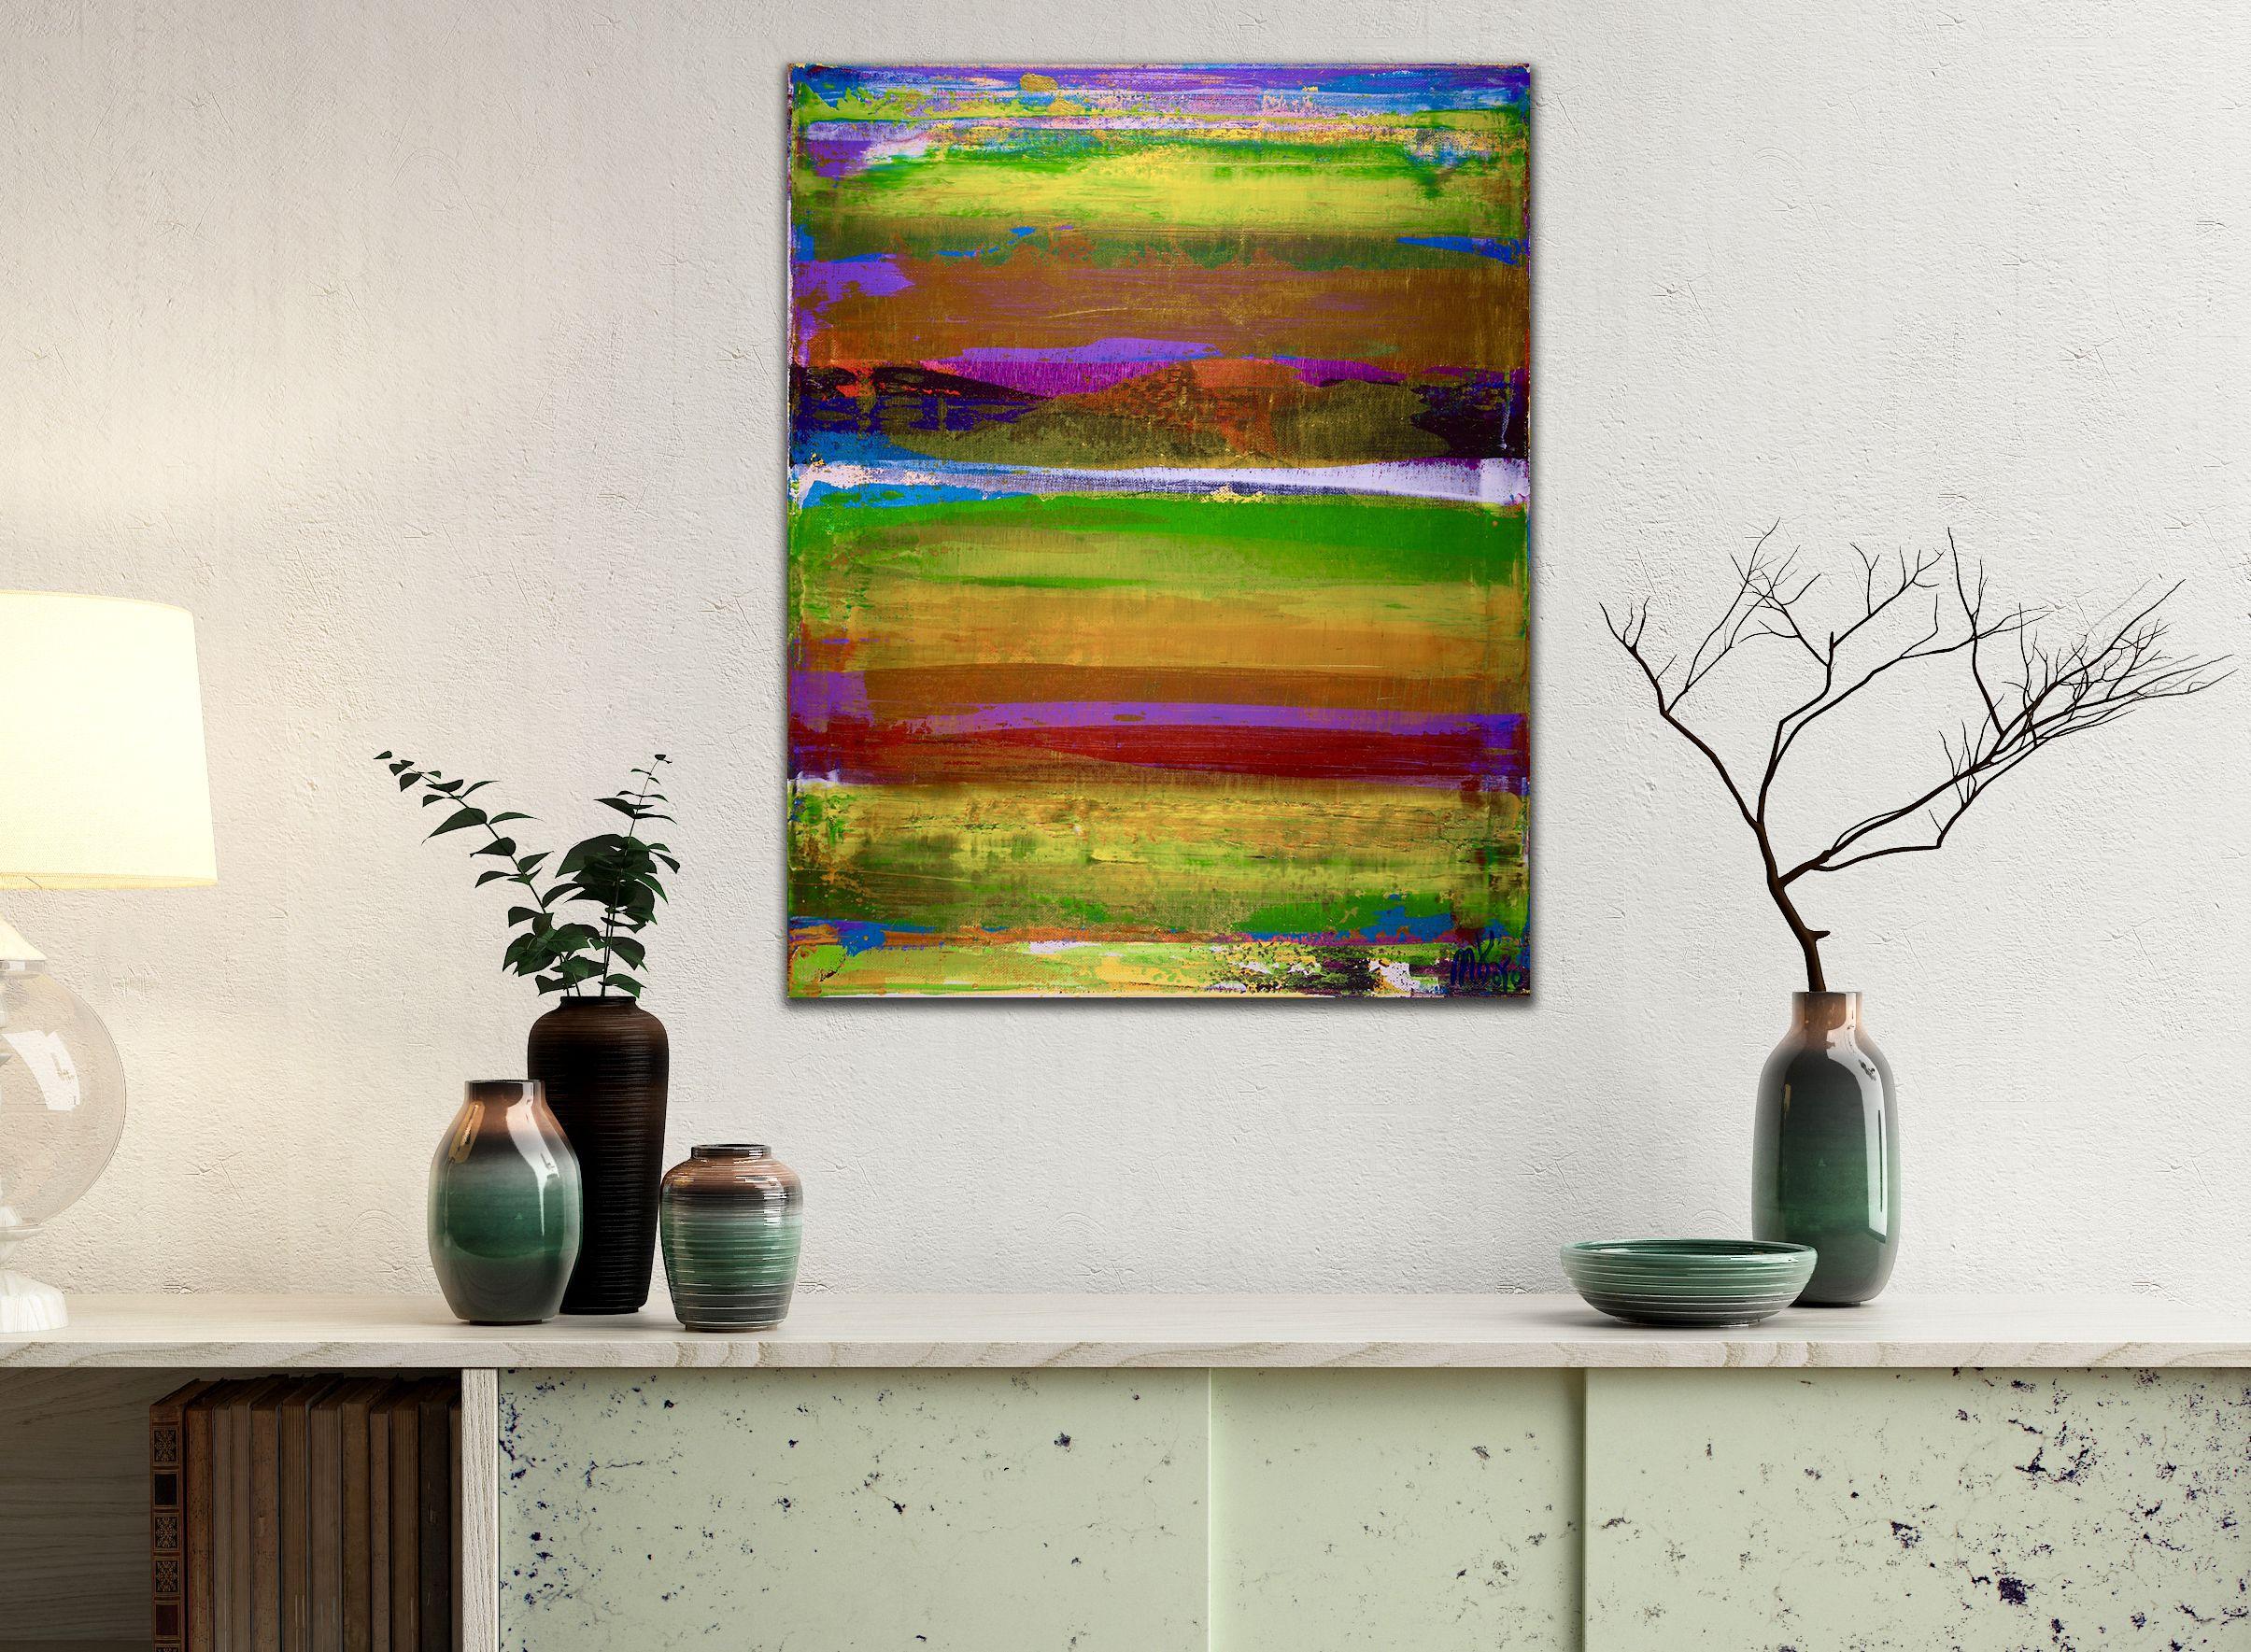 Very vibrant and bold colorfield painting with great light and organic details. Textured with many layers of gesso to prime the canvas then applied high quality Sennelier and Goldern Acrylics and glossy finish. This artwork is very reflective with